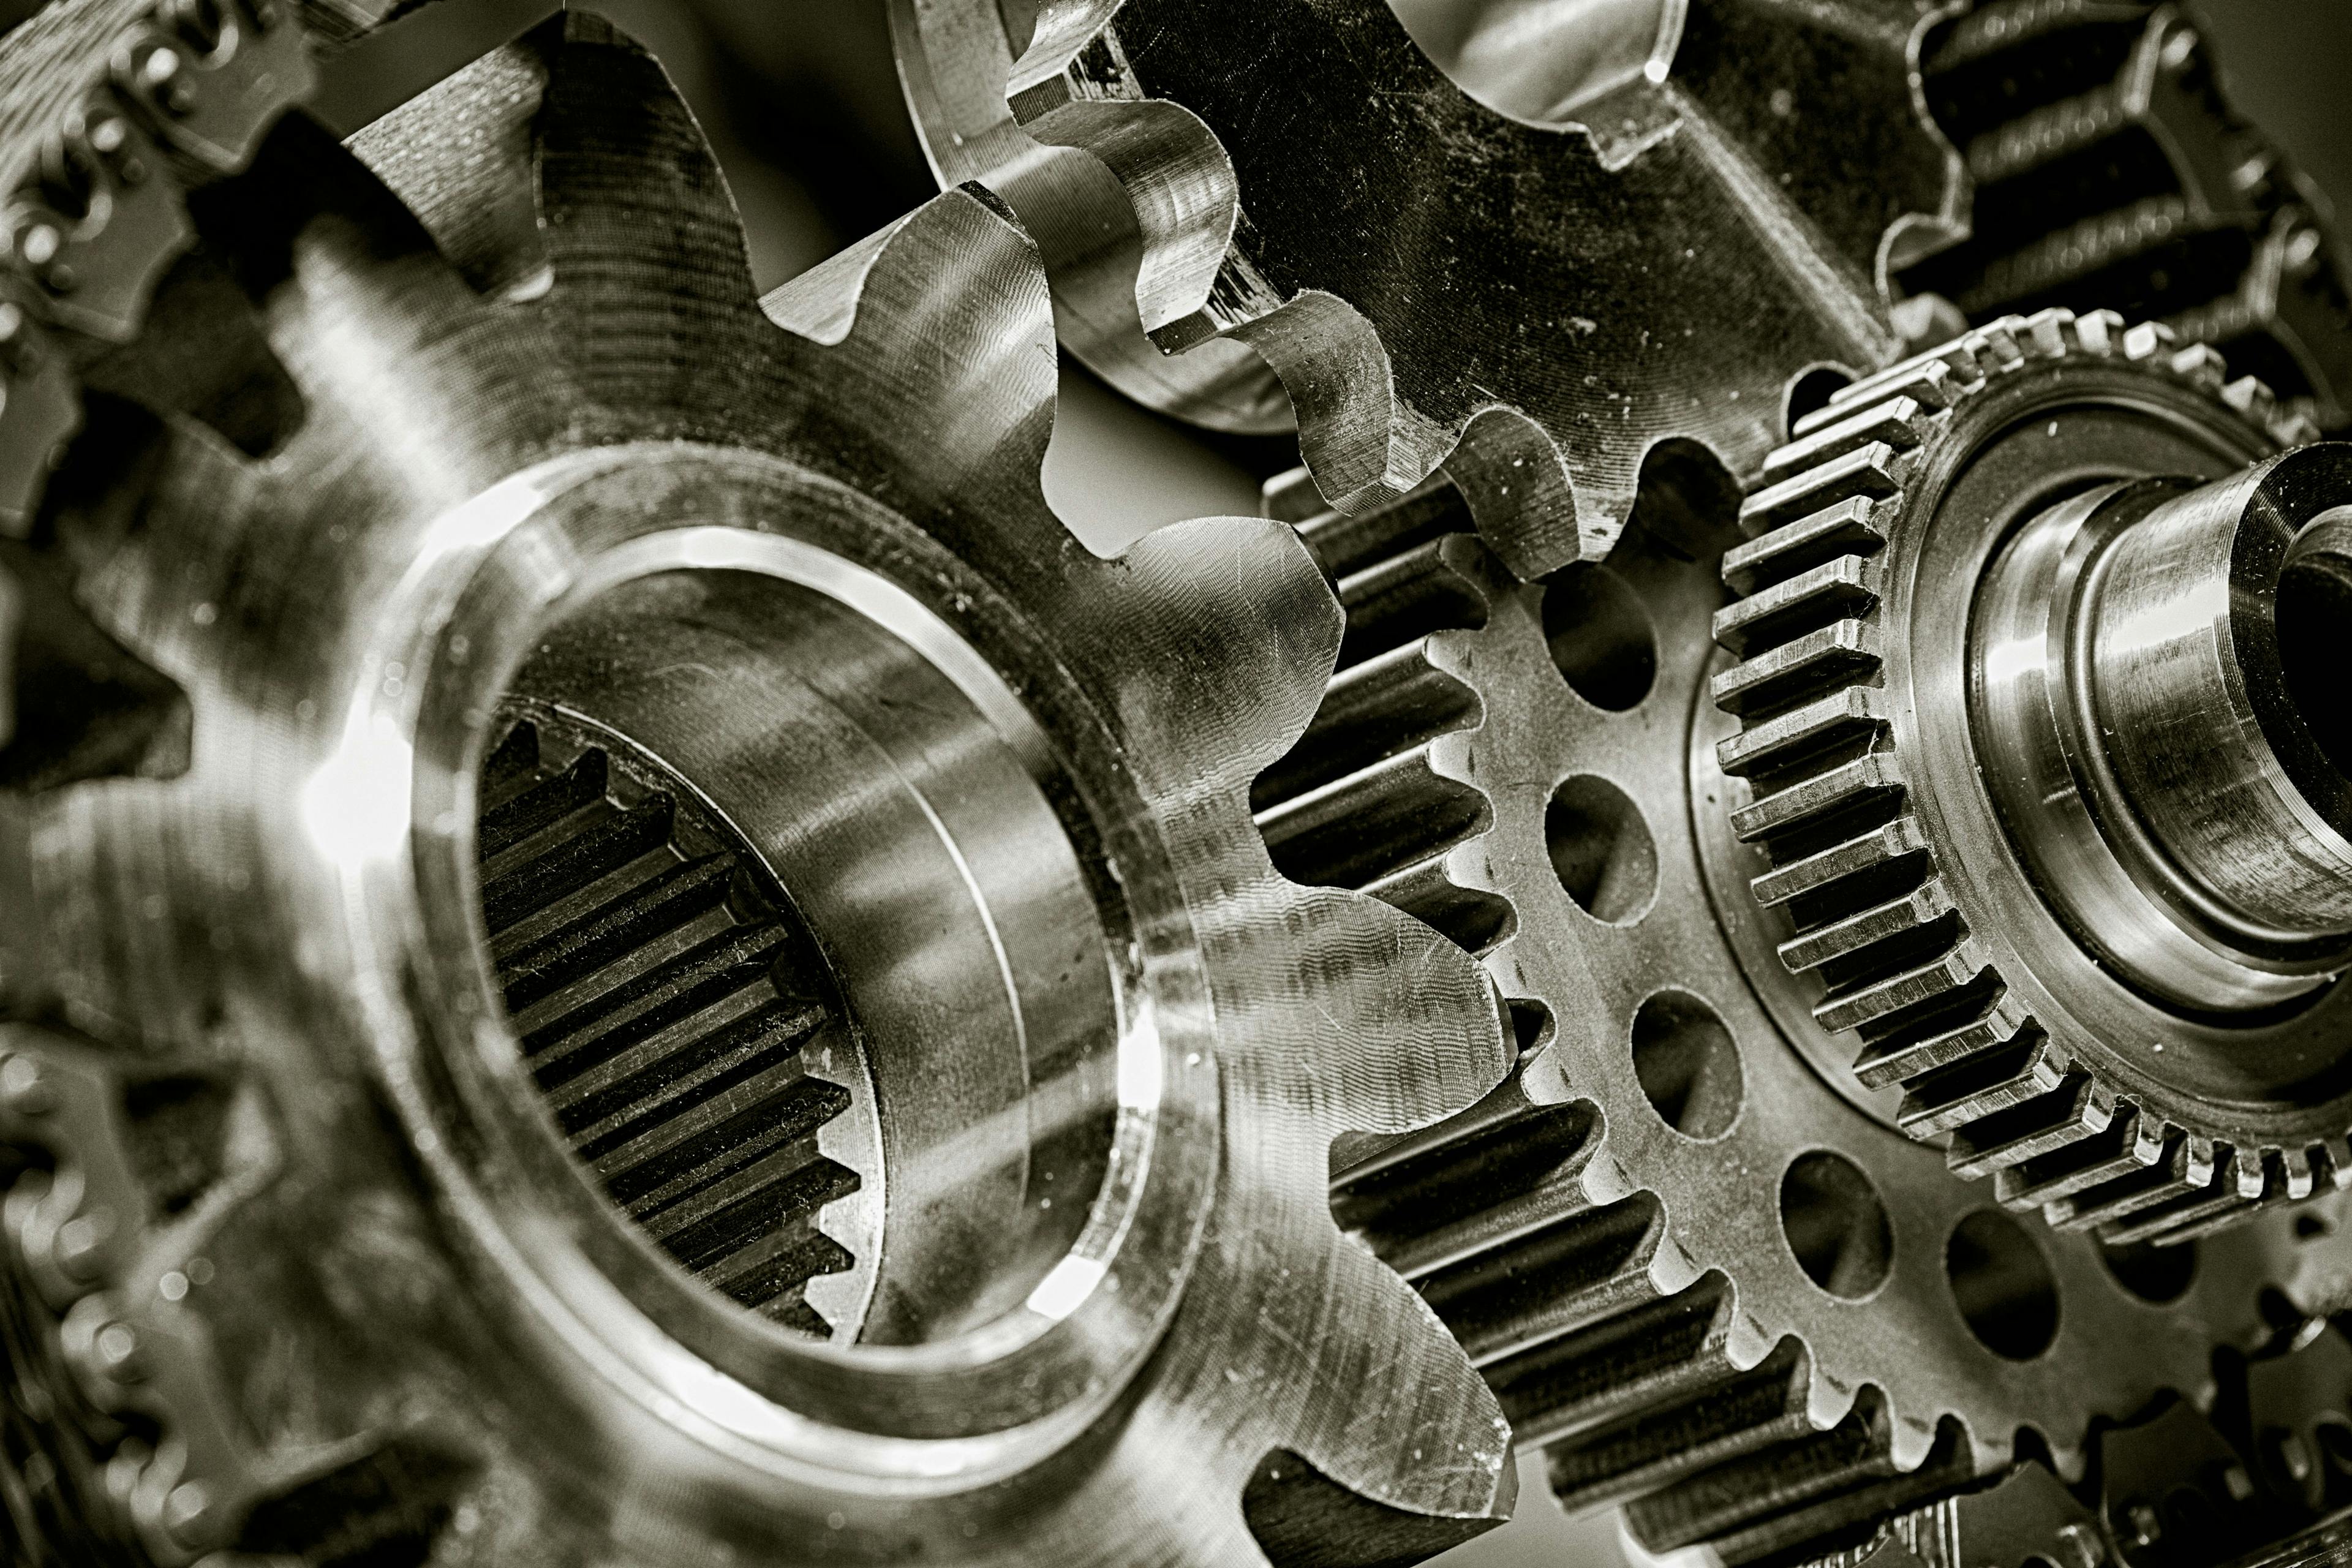 titanium and steel gears and as aerospace and rocket parts | Image Credit: © christian42 - stock.adobe.com.